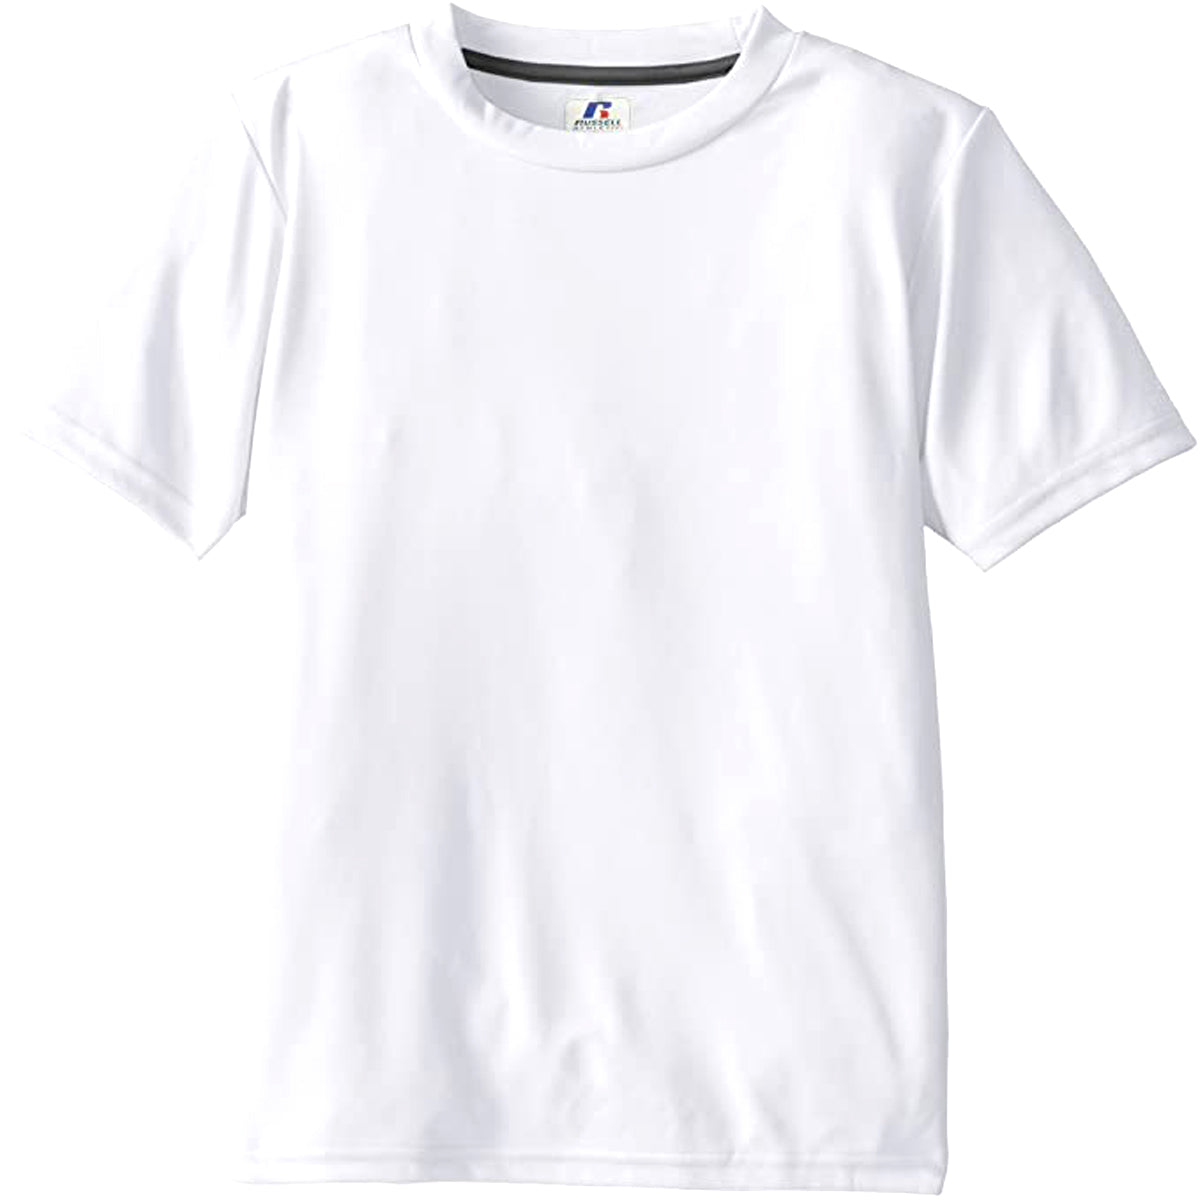 Russell Athletic Youth Short-Sleeve Cotton T-Shirt | 94030BK Apparel Russell Athletic Youth Small White 